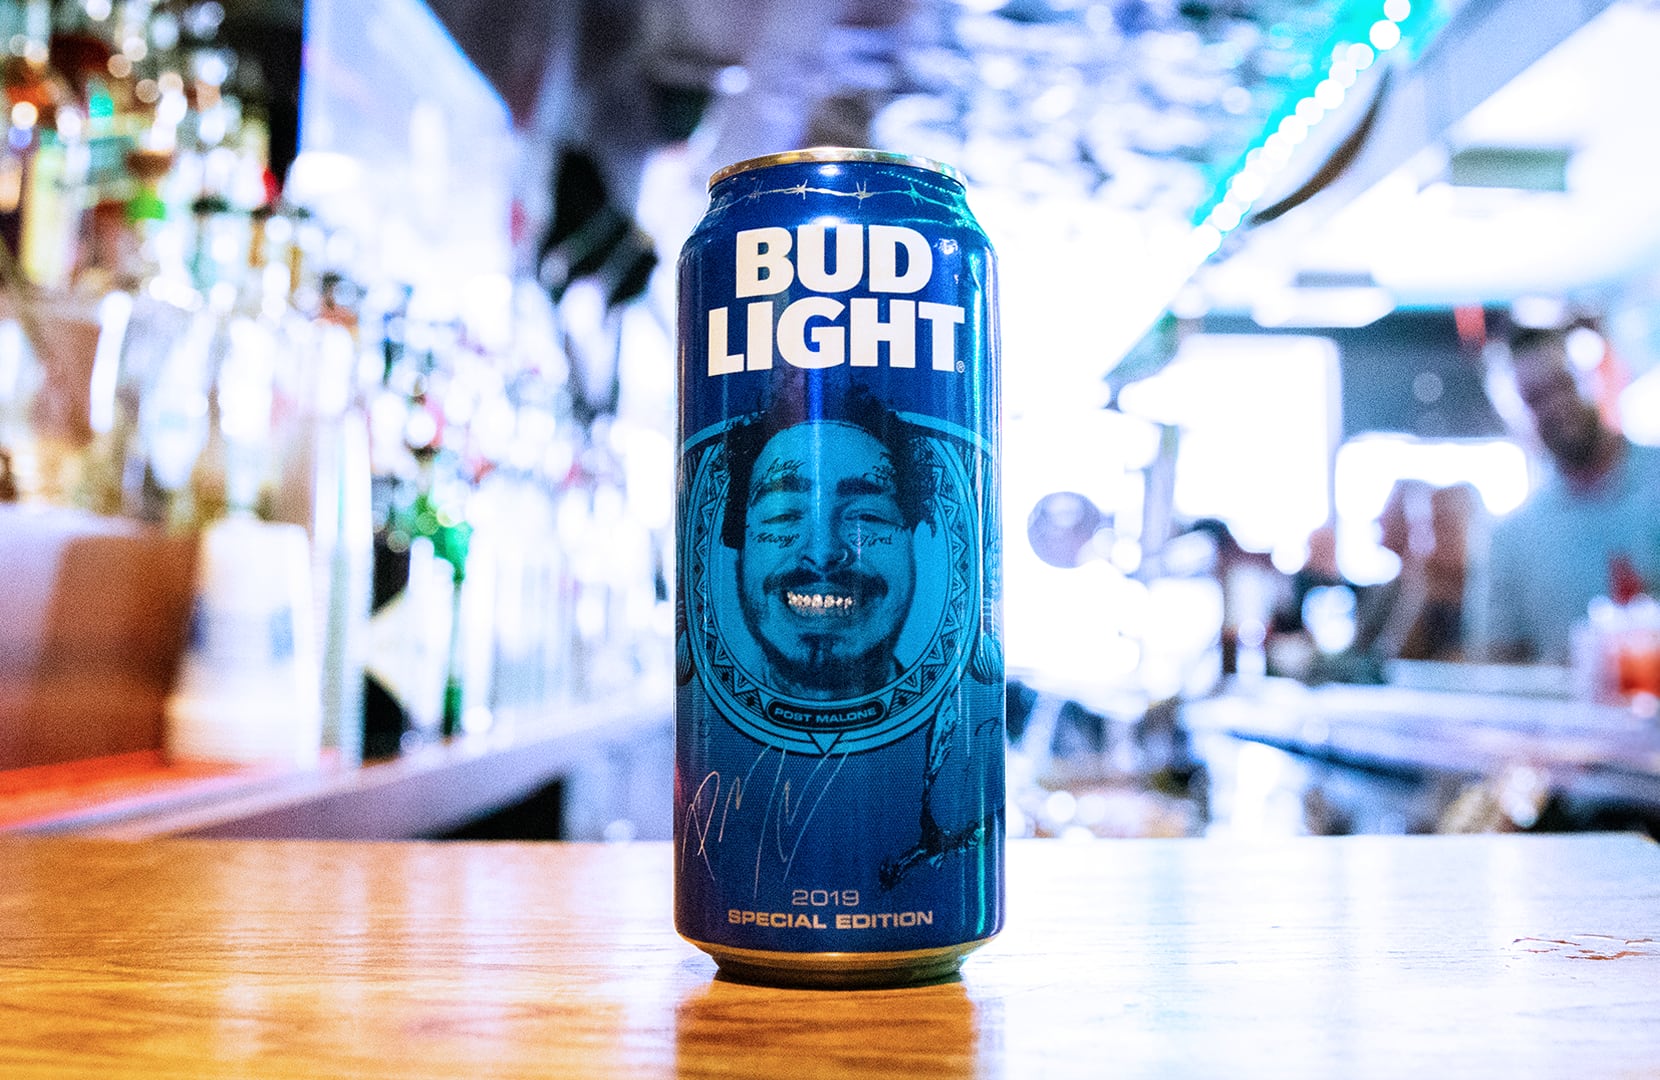 That's rapper Post Malone's face on Bud Light cans in Texas